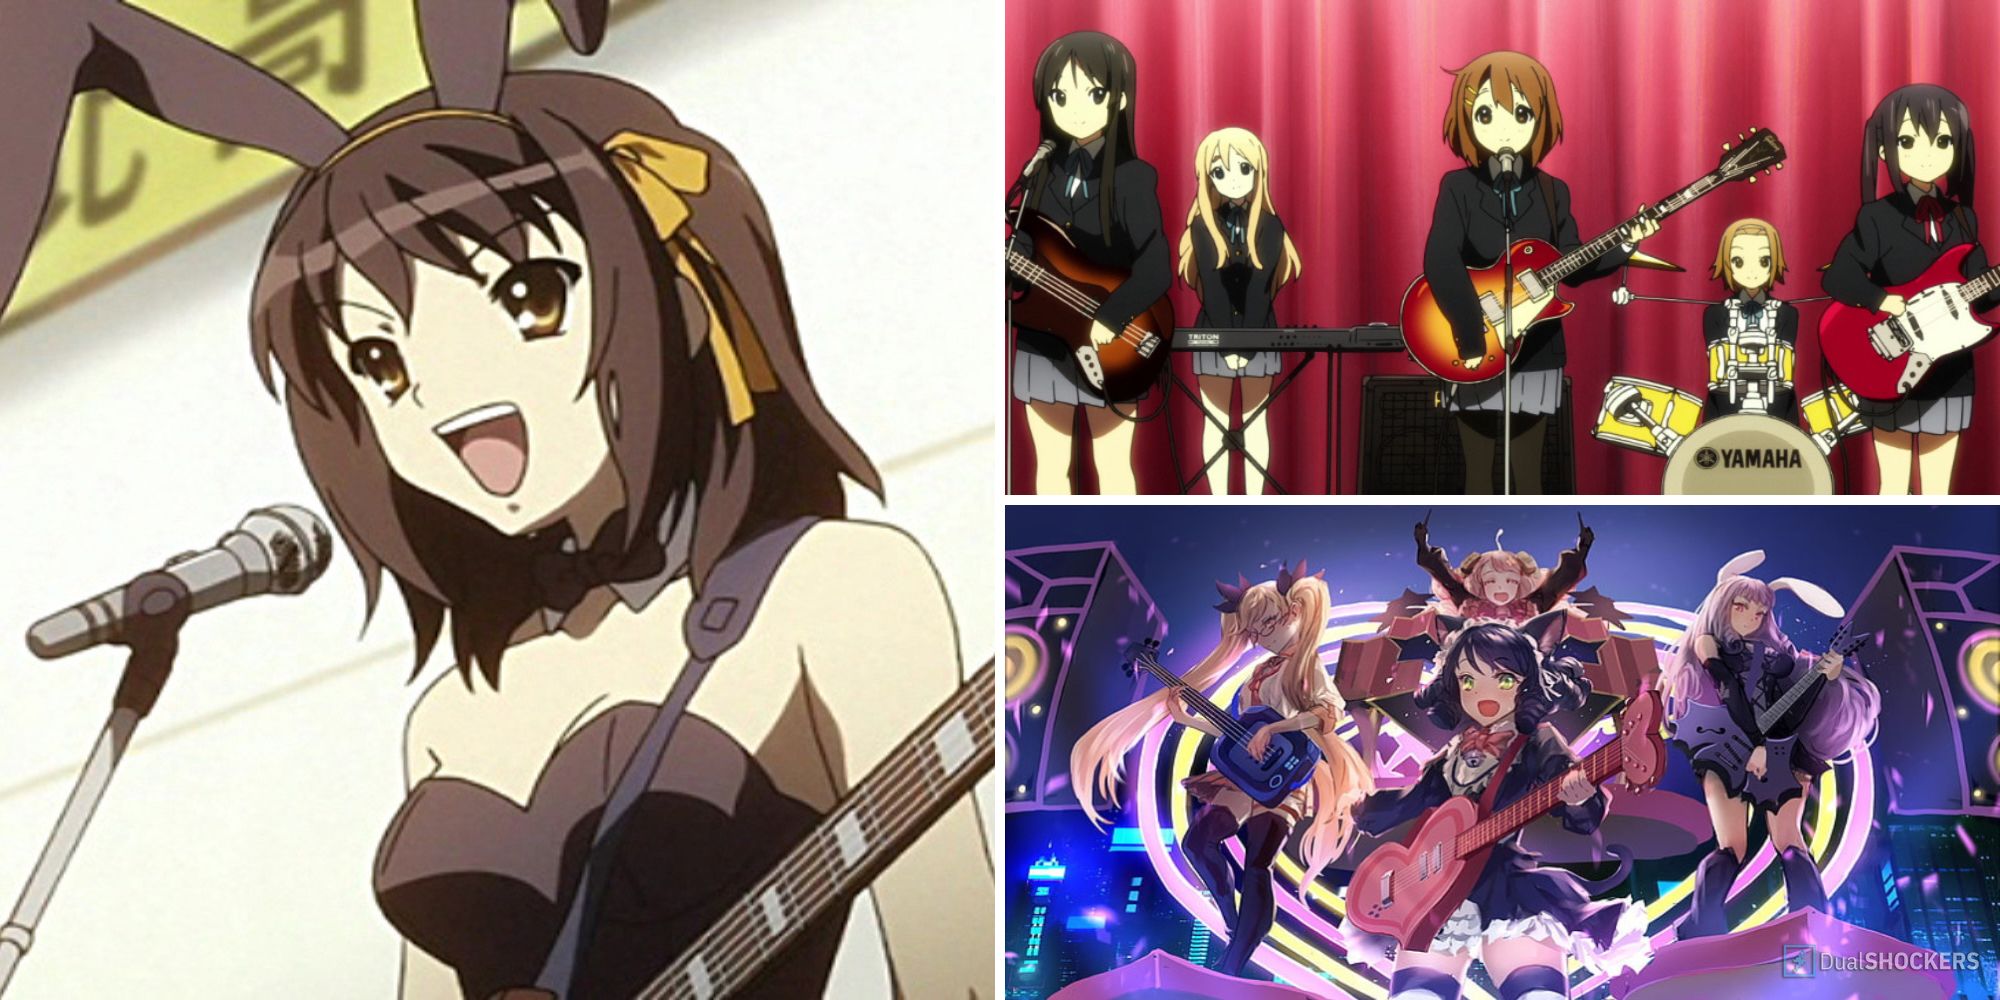 Most Iconic Musicians in Anime Feature